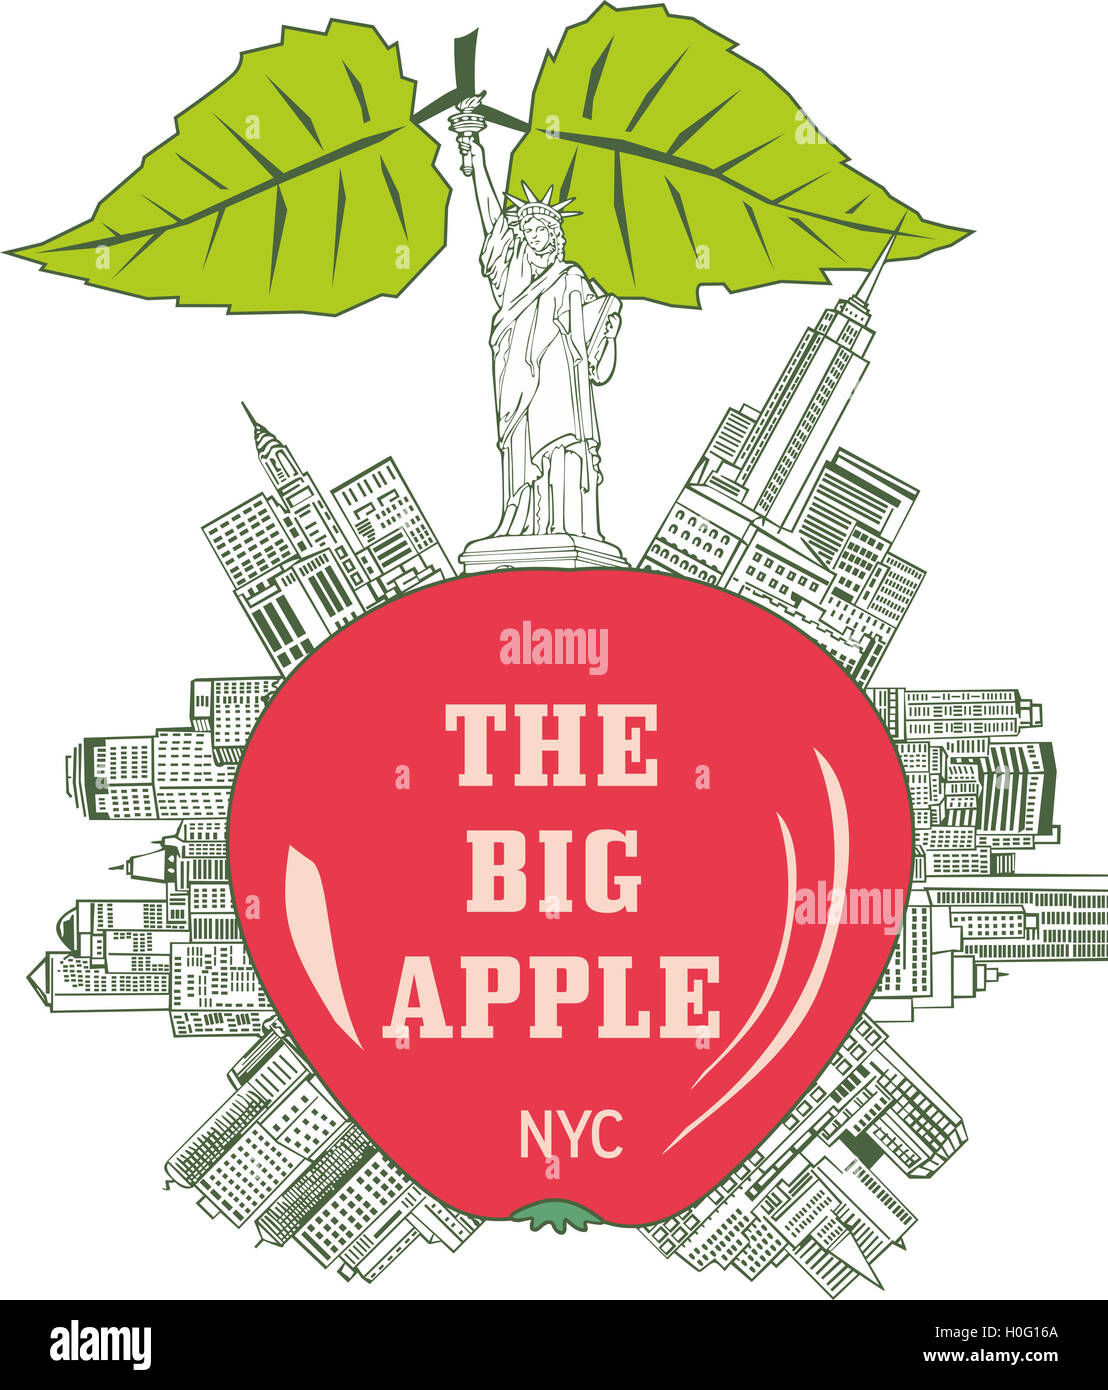 The Big Apple, New York City. The generic emblem of New York as apple with skyscrapers. Stock Photo